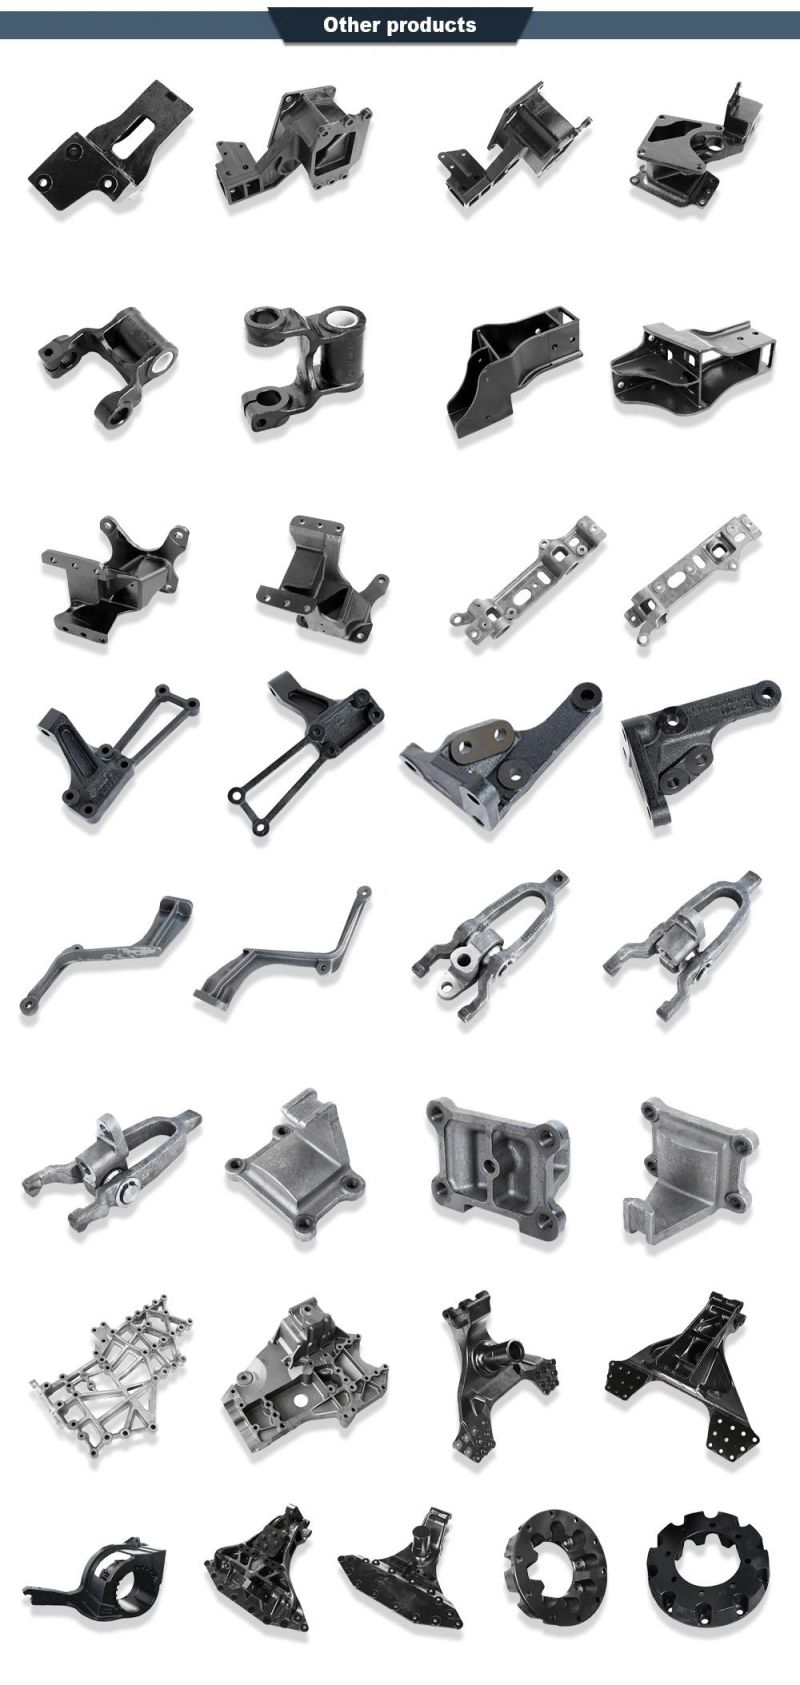 Truck/Machinery/Motor/Vehicle/Valve/Trailer/Railway/Auto Parts Investment/Lost Wax/Precision Casting-Carbon/Alloy/Stainless Steel